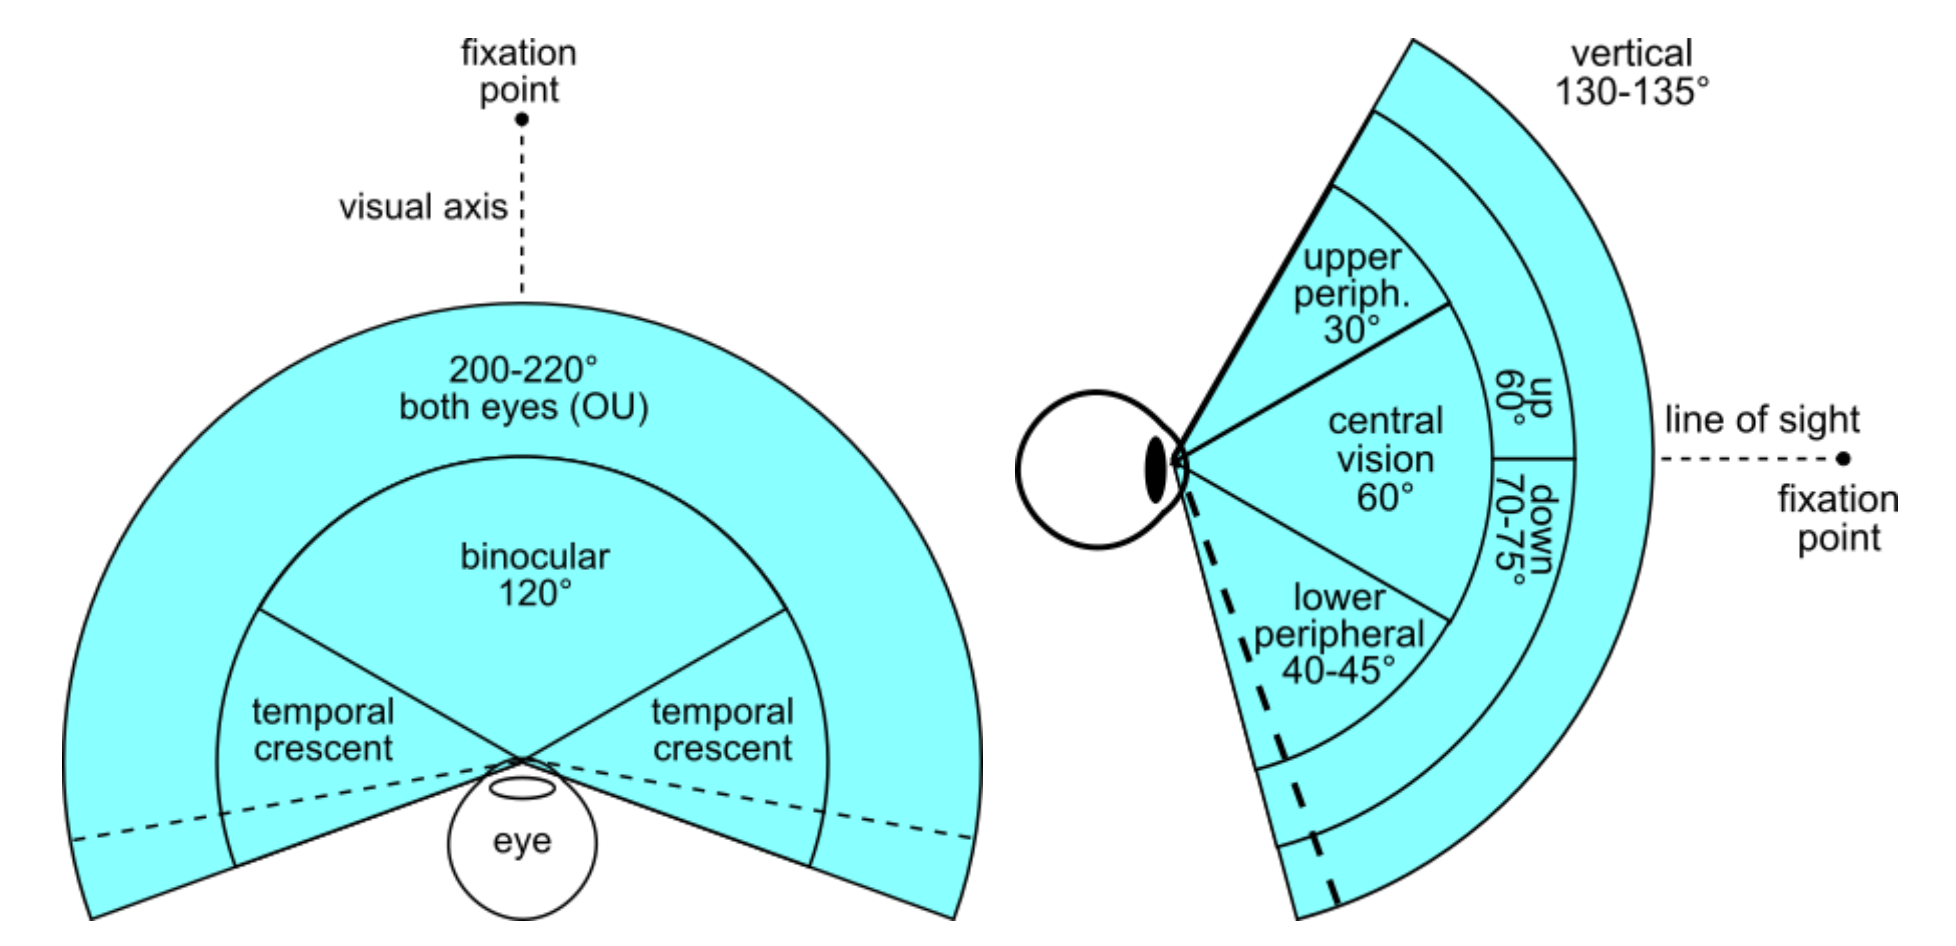 Diagram of the field of vision of a human eye